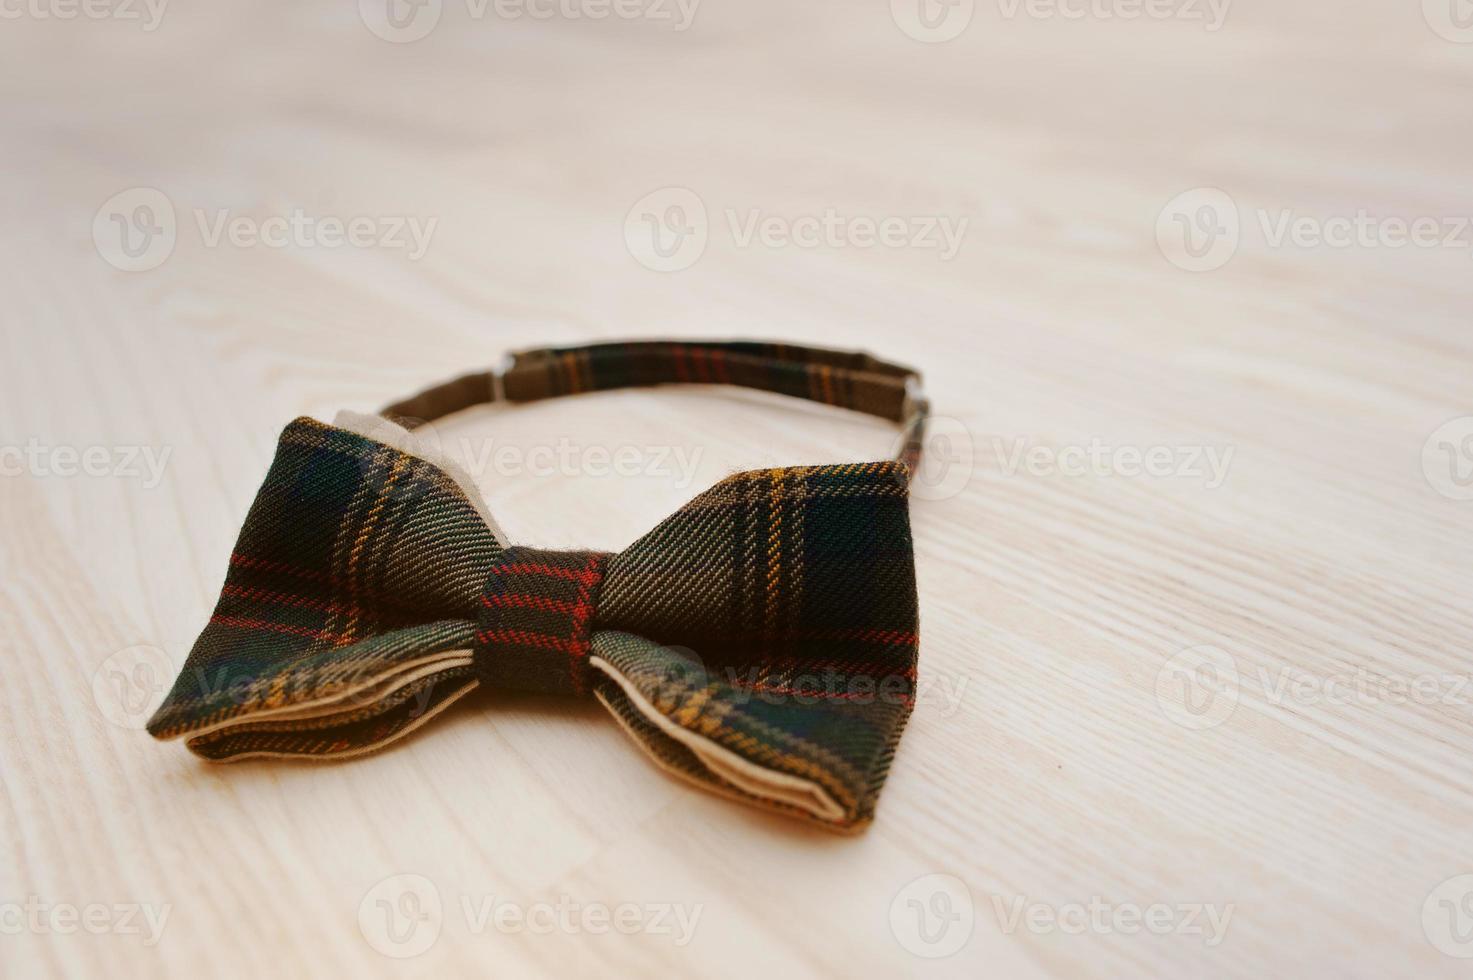 Cotton checkered bow tie on light wooden background photo